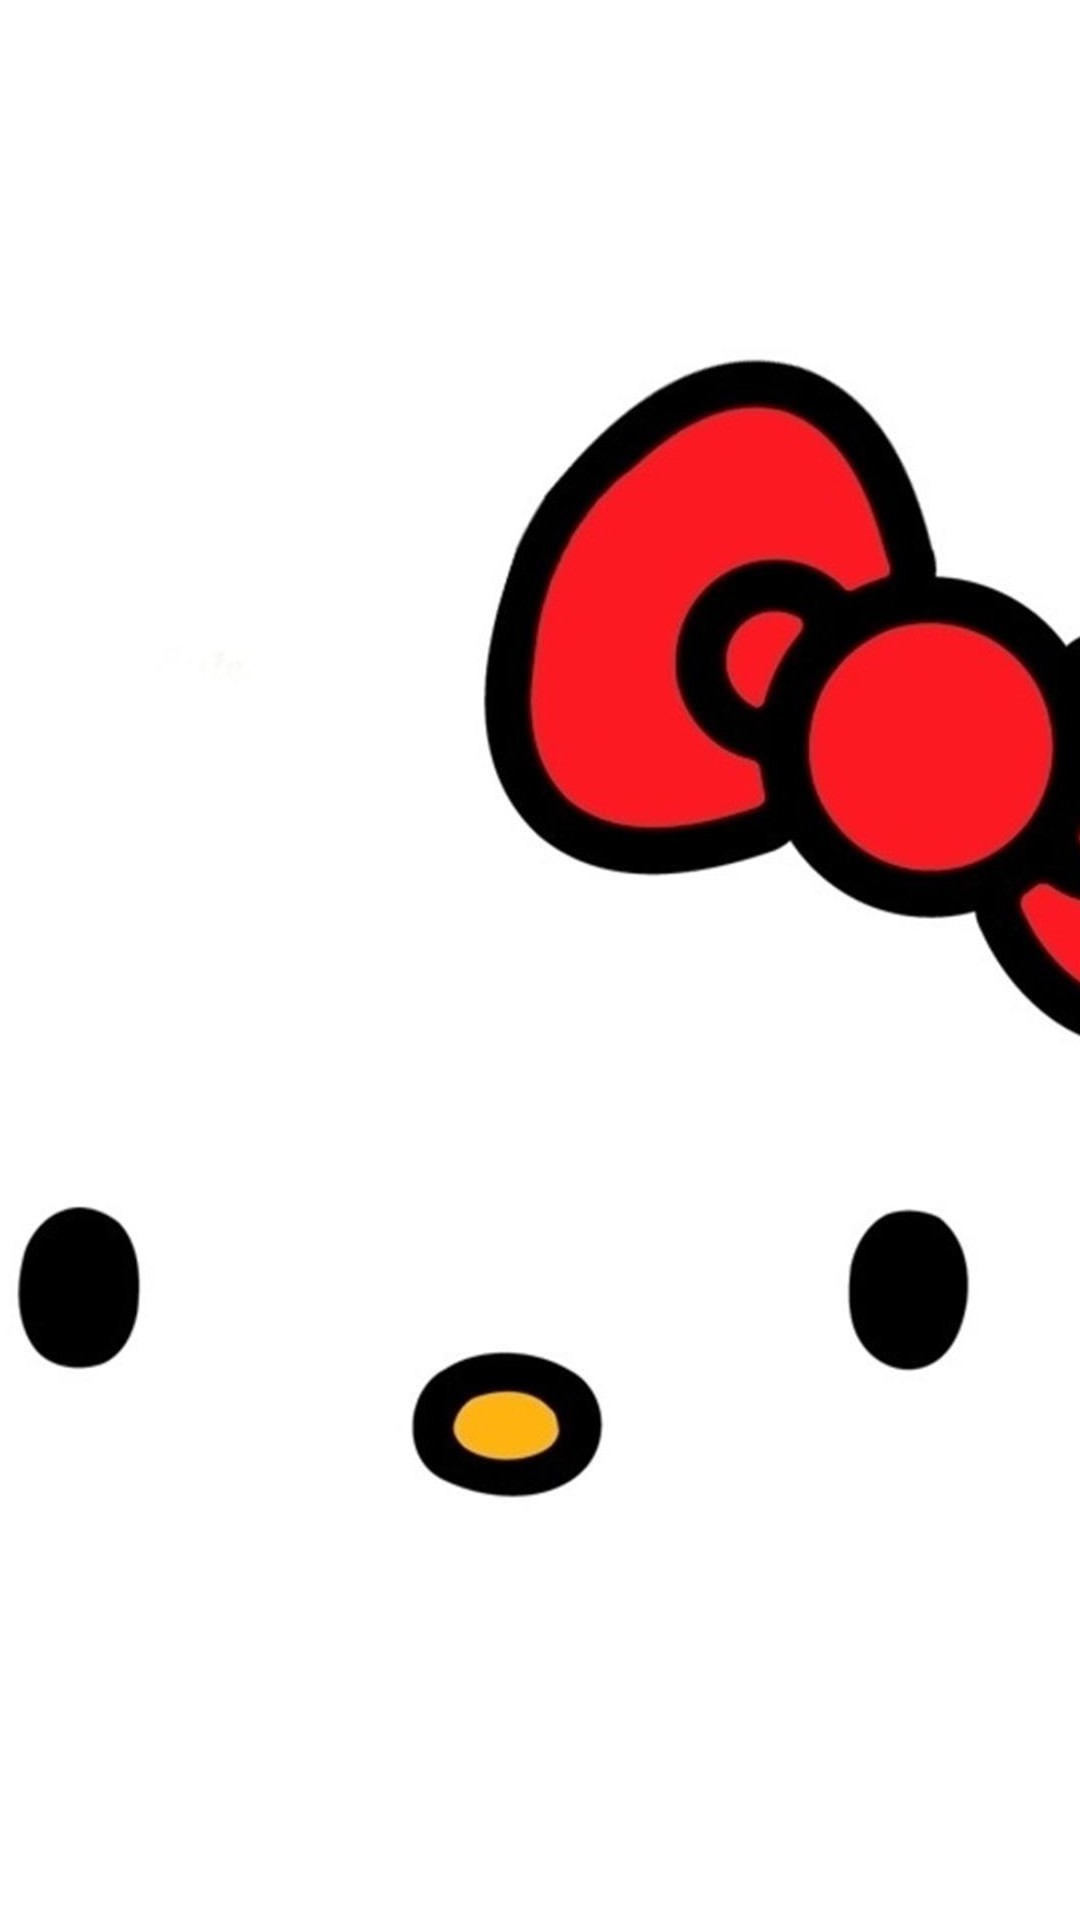 Hello Kitty Wallpaper For iPhone Image